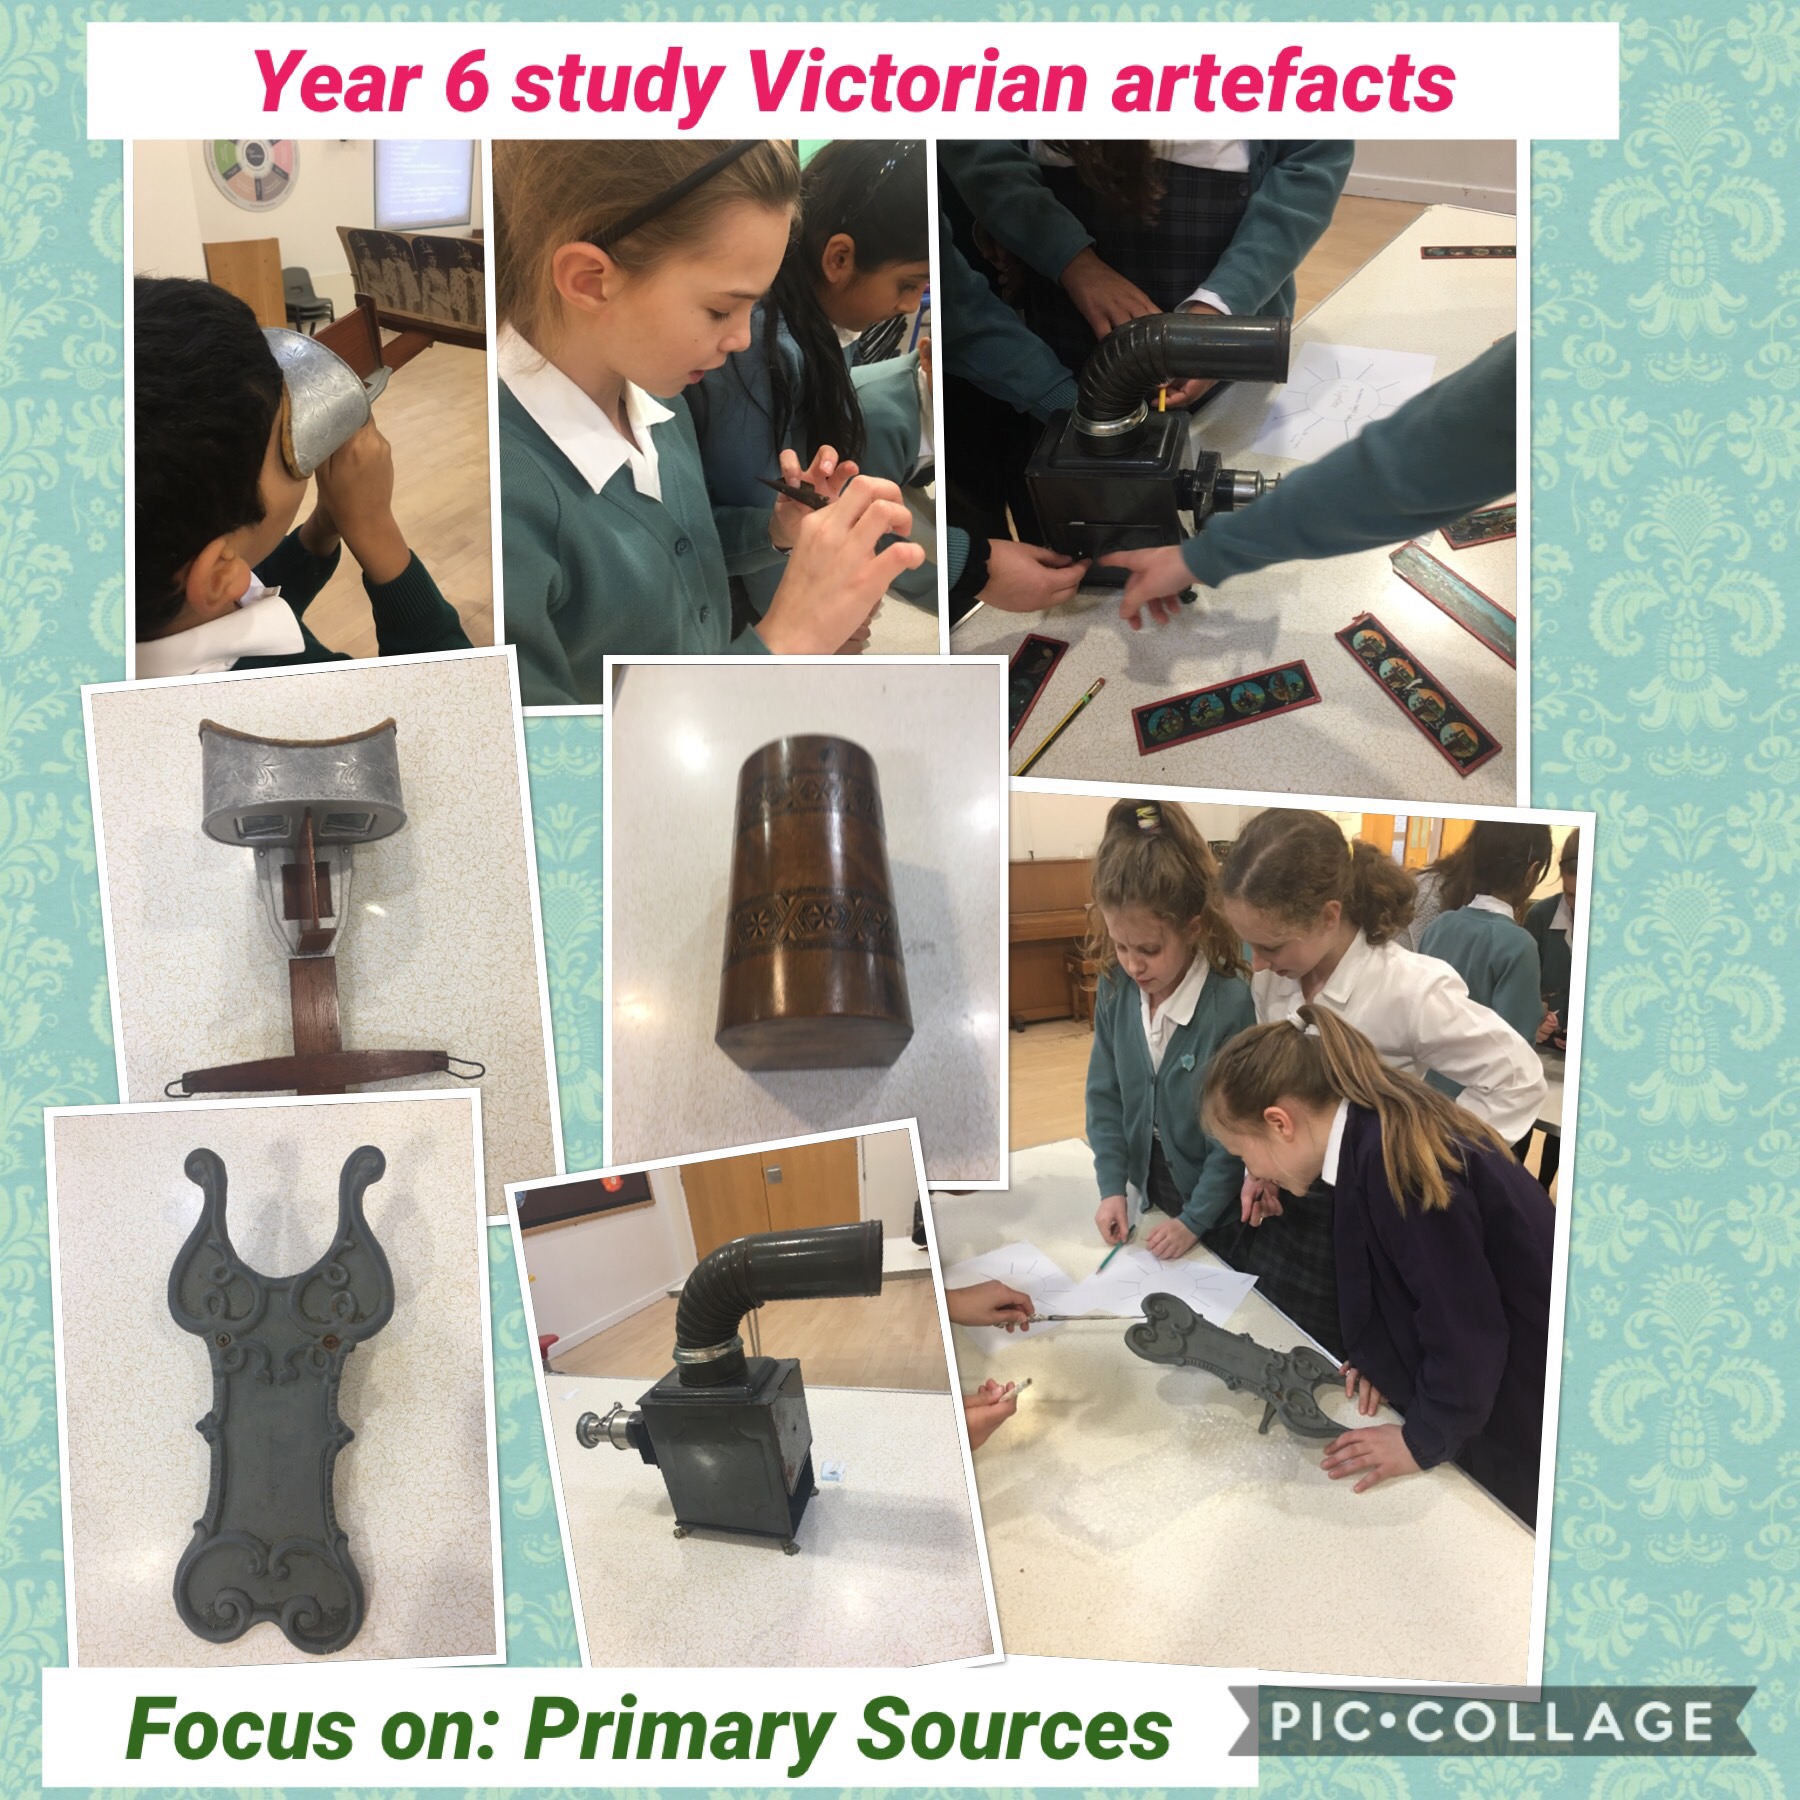 Year 6 pupils learn about Victorian artefacts